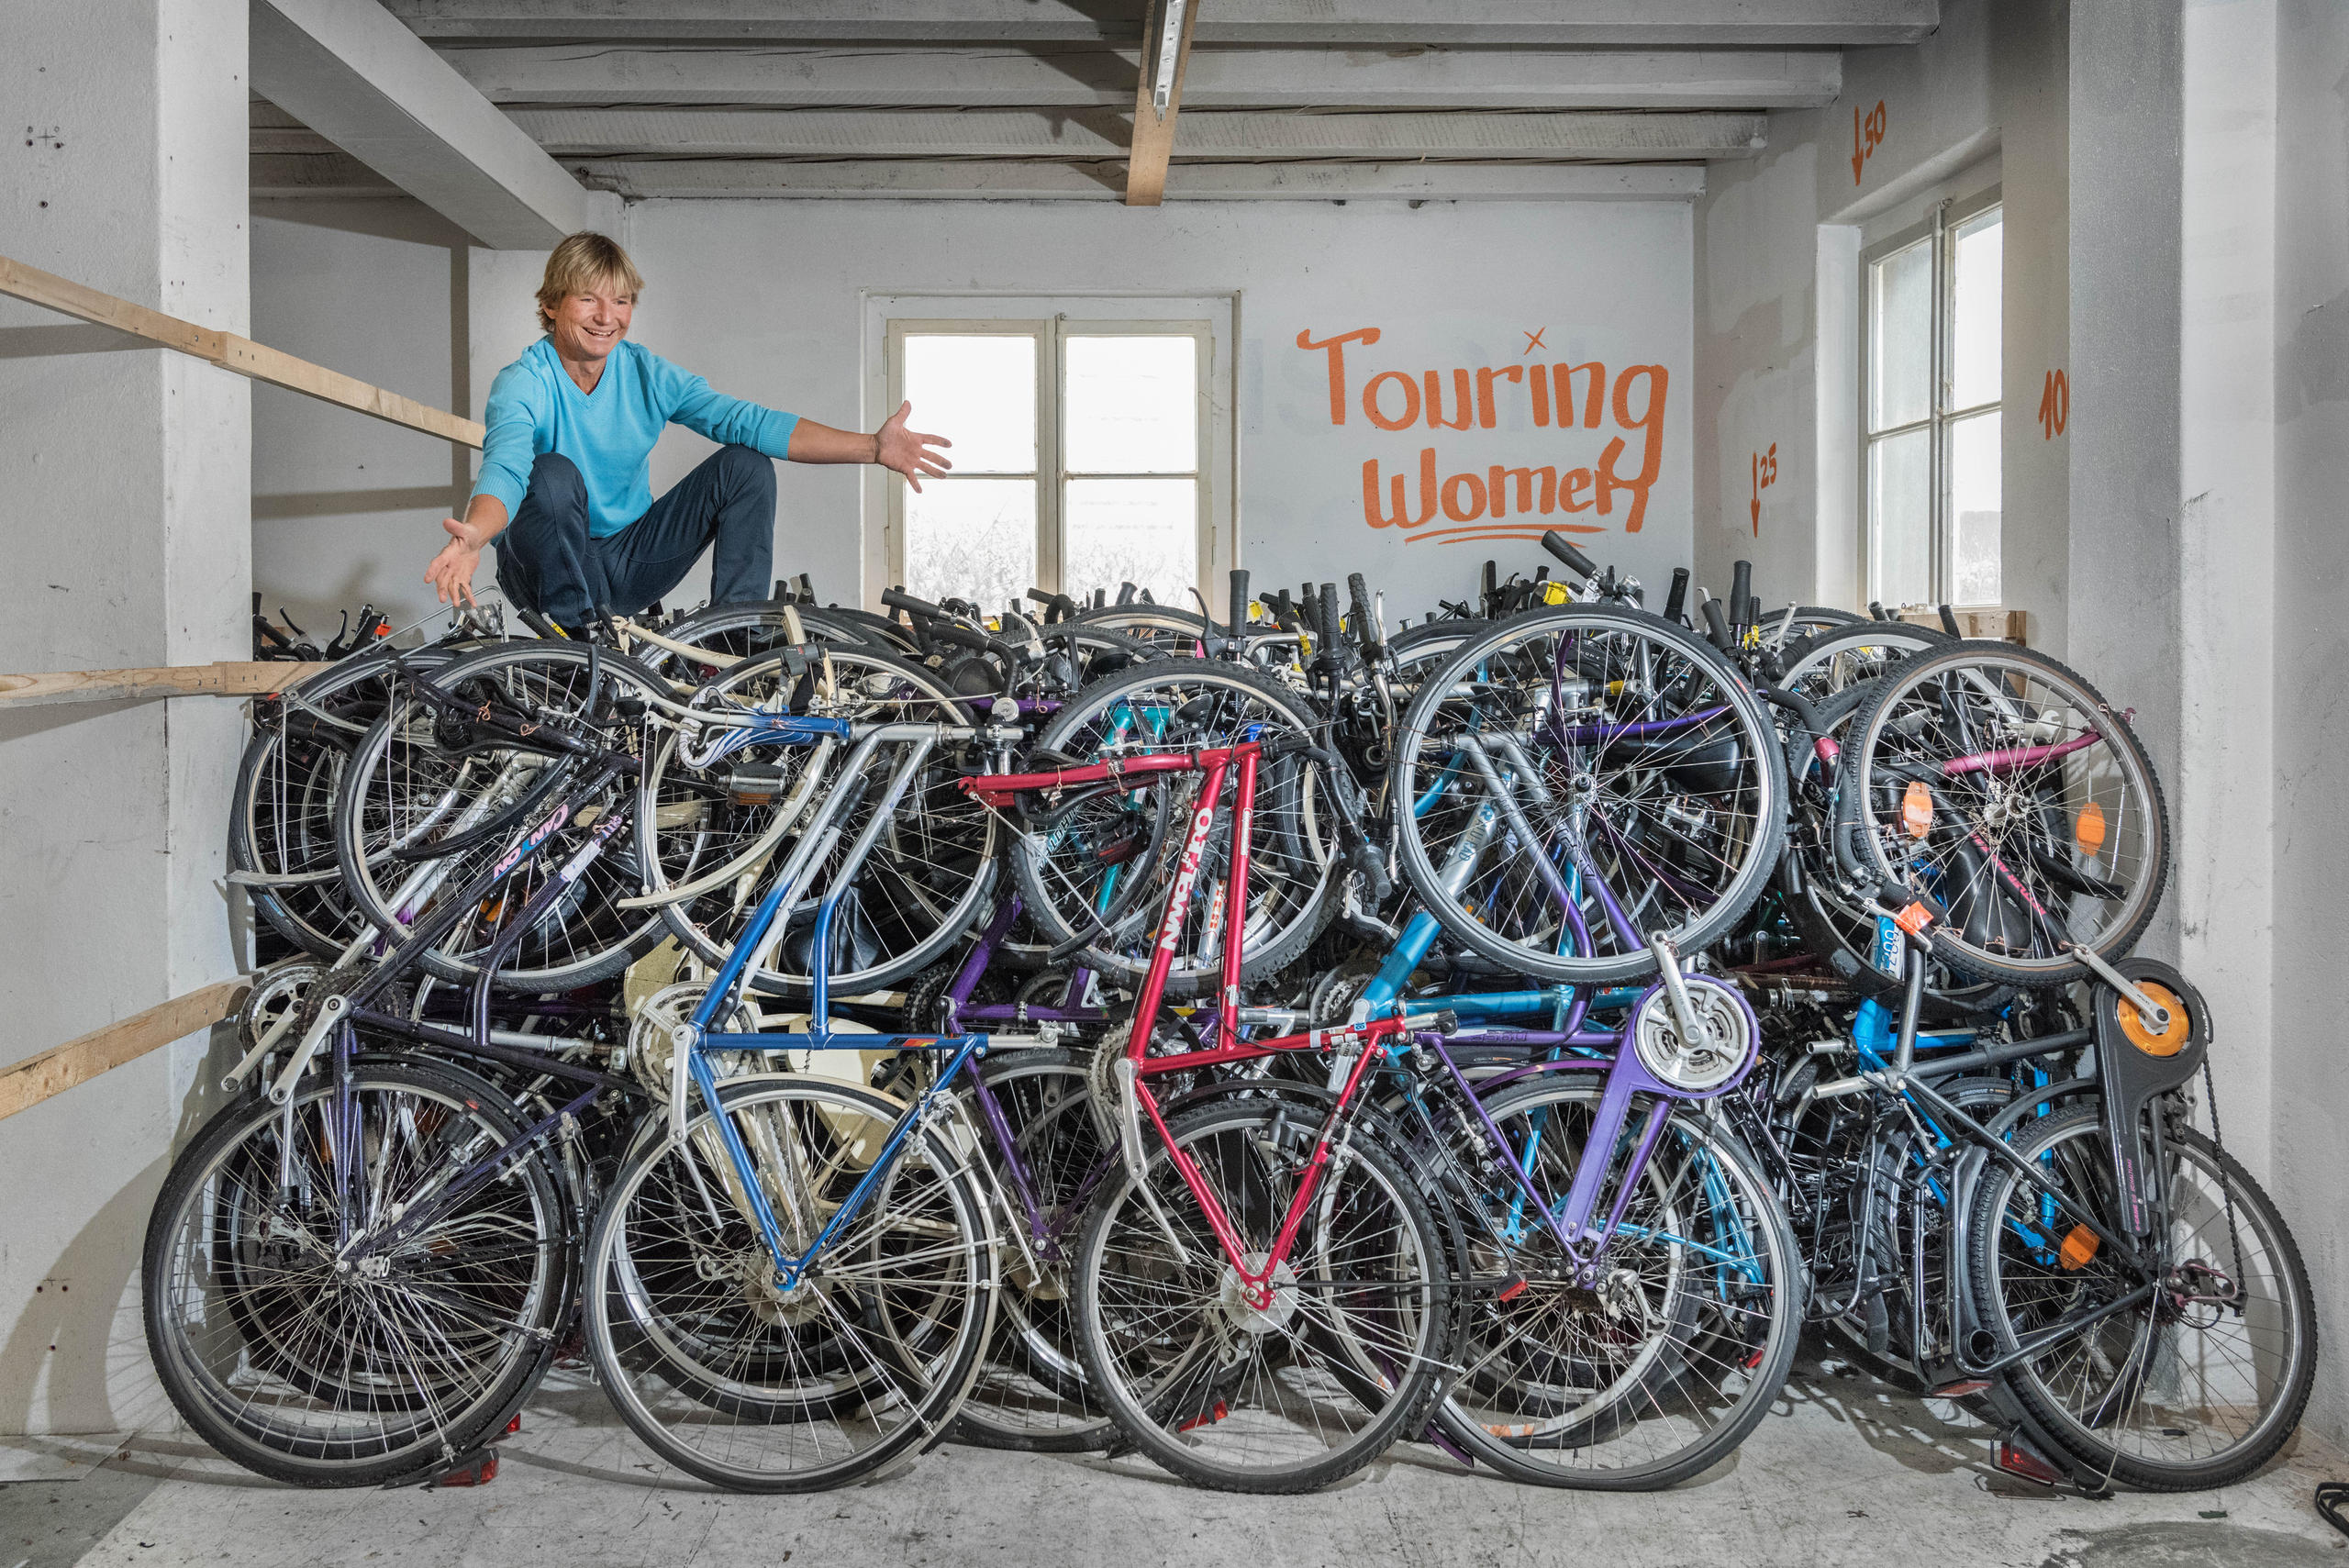 A man sits on top of a pile of bikes